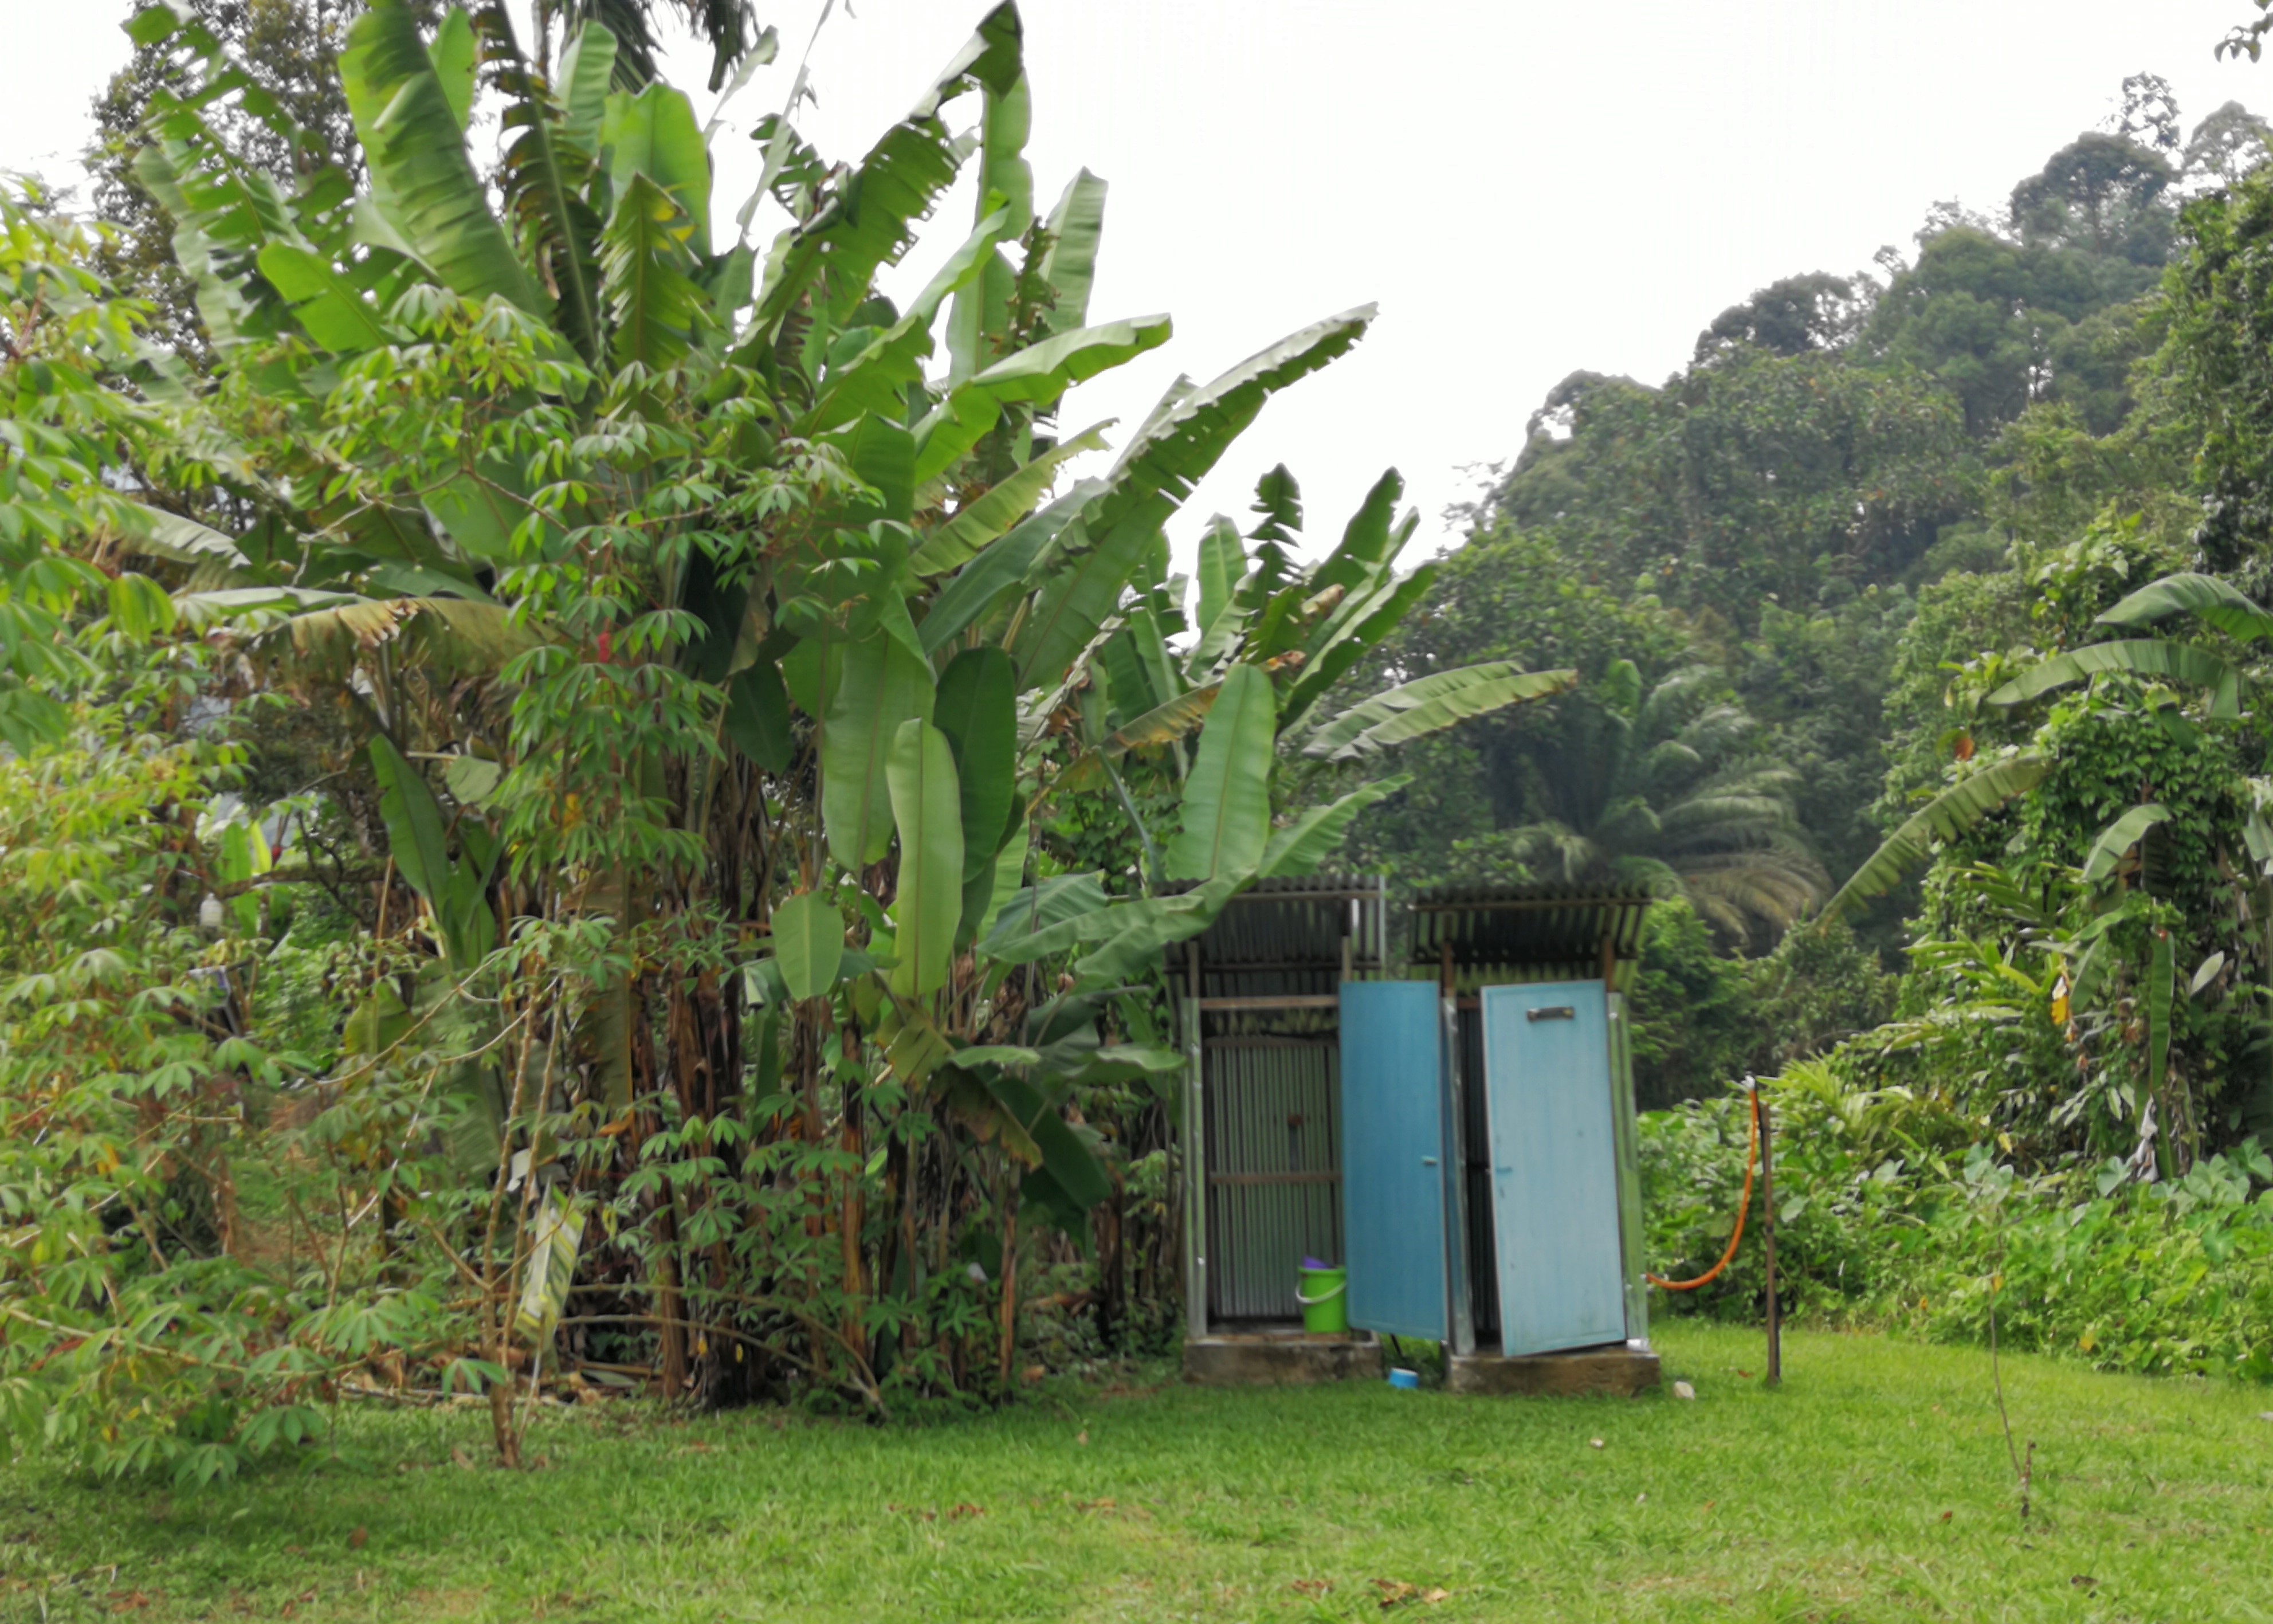 There is no electricity (you can charge your phone in your host’s home) and you answer the call of nature in an outhouse with a squat toilet. Those who prefer urban comforts can opt for eco-villas downstream which employ locals, who can also be hired as day trip guides.